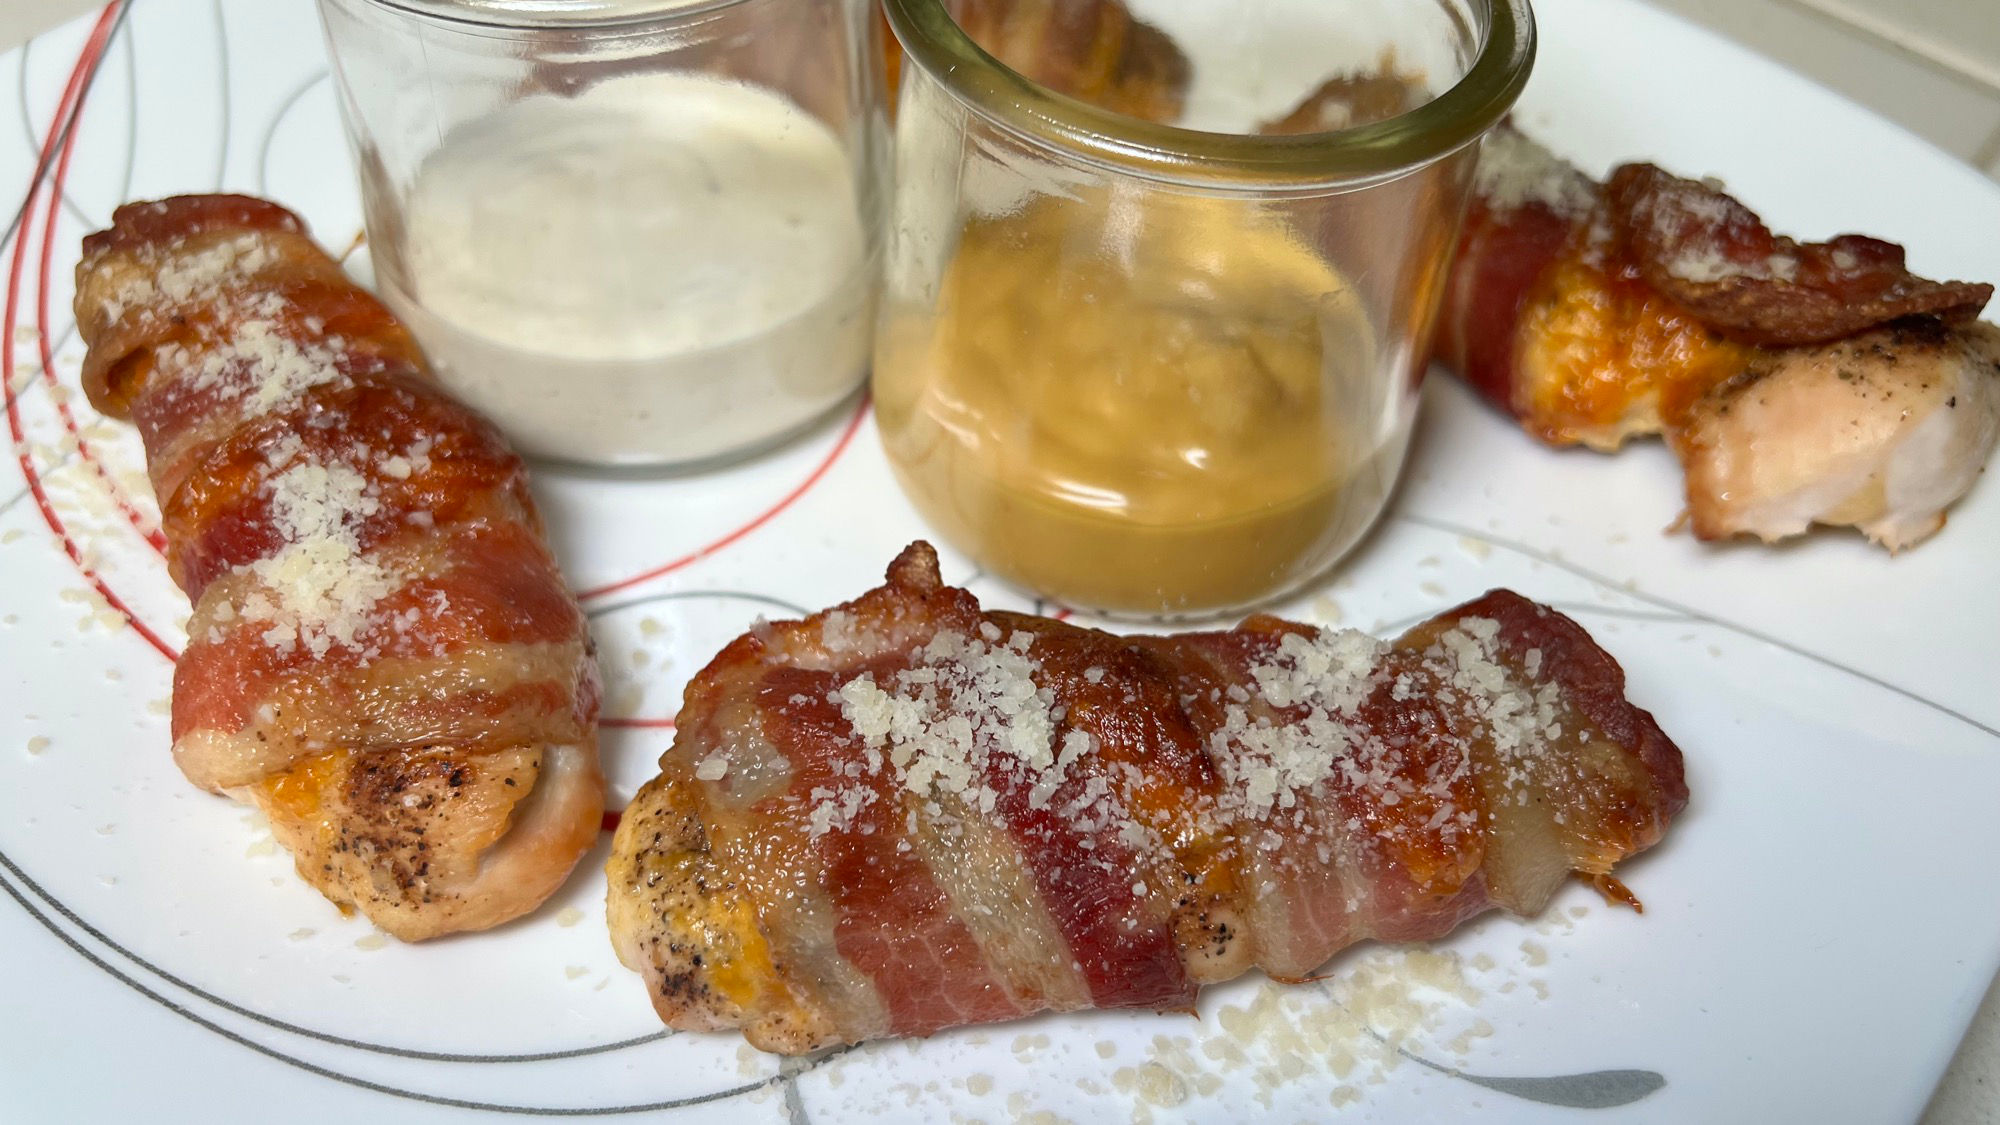 Bacon Wrapped Cheesy Chicken